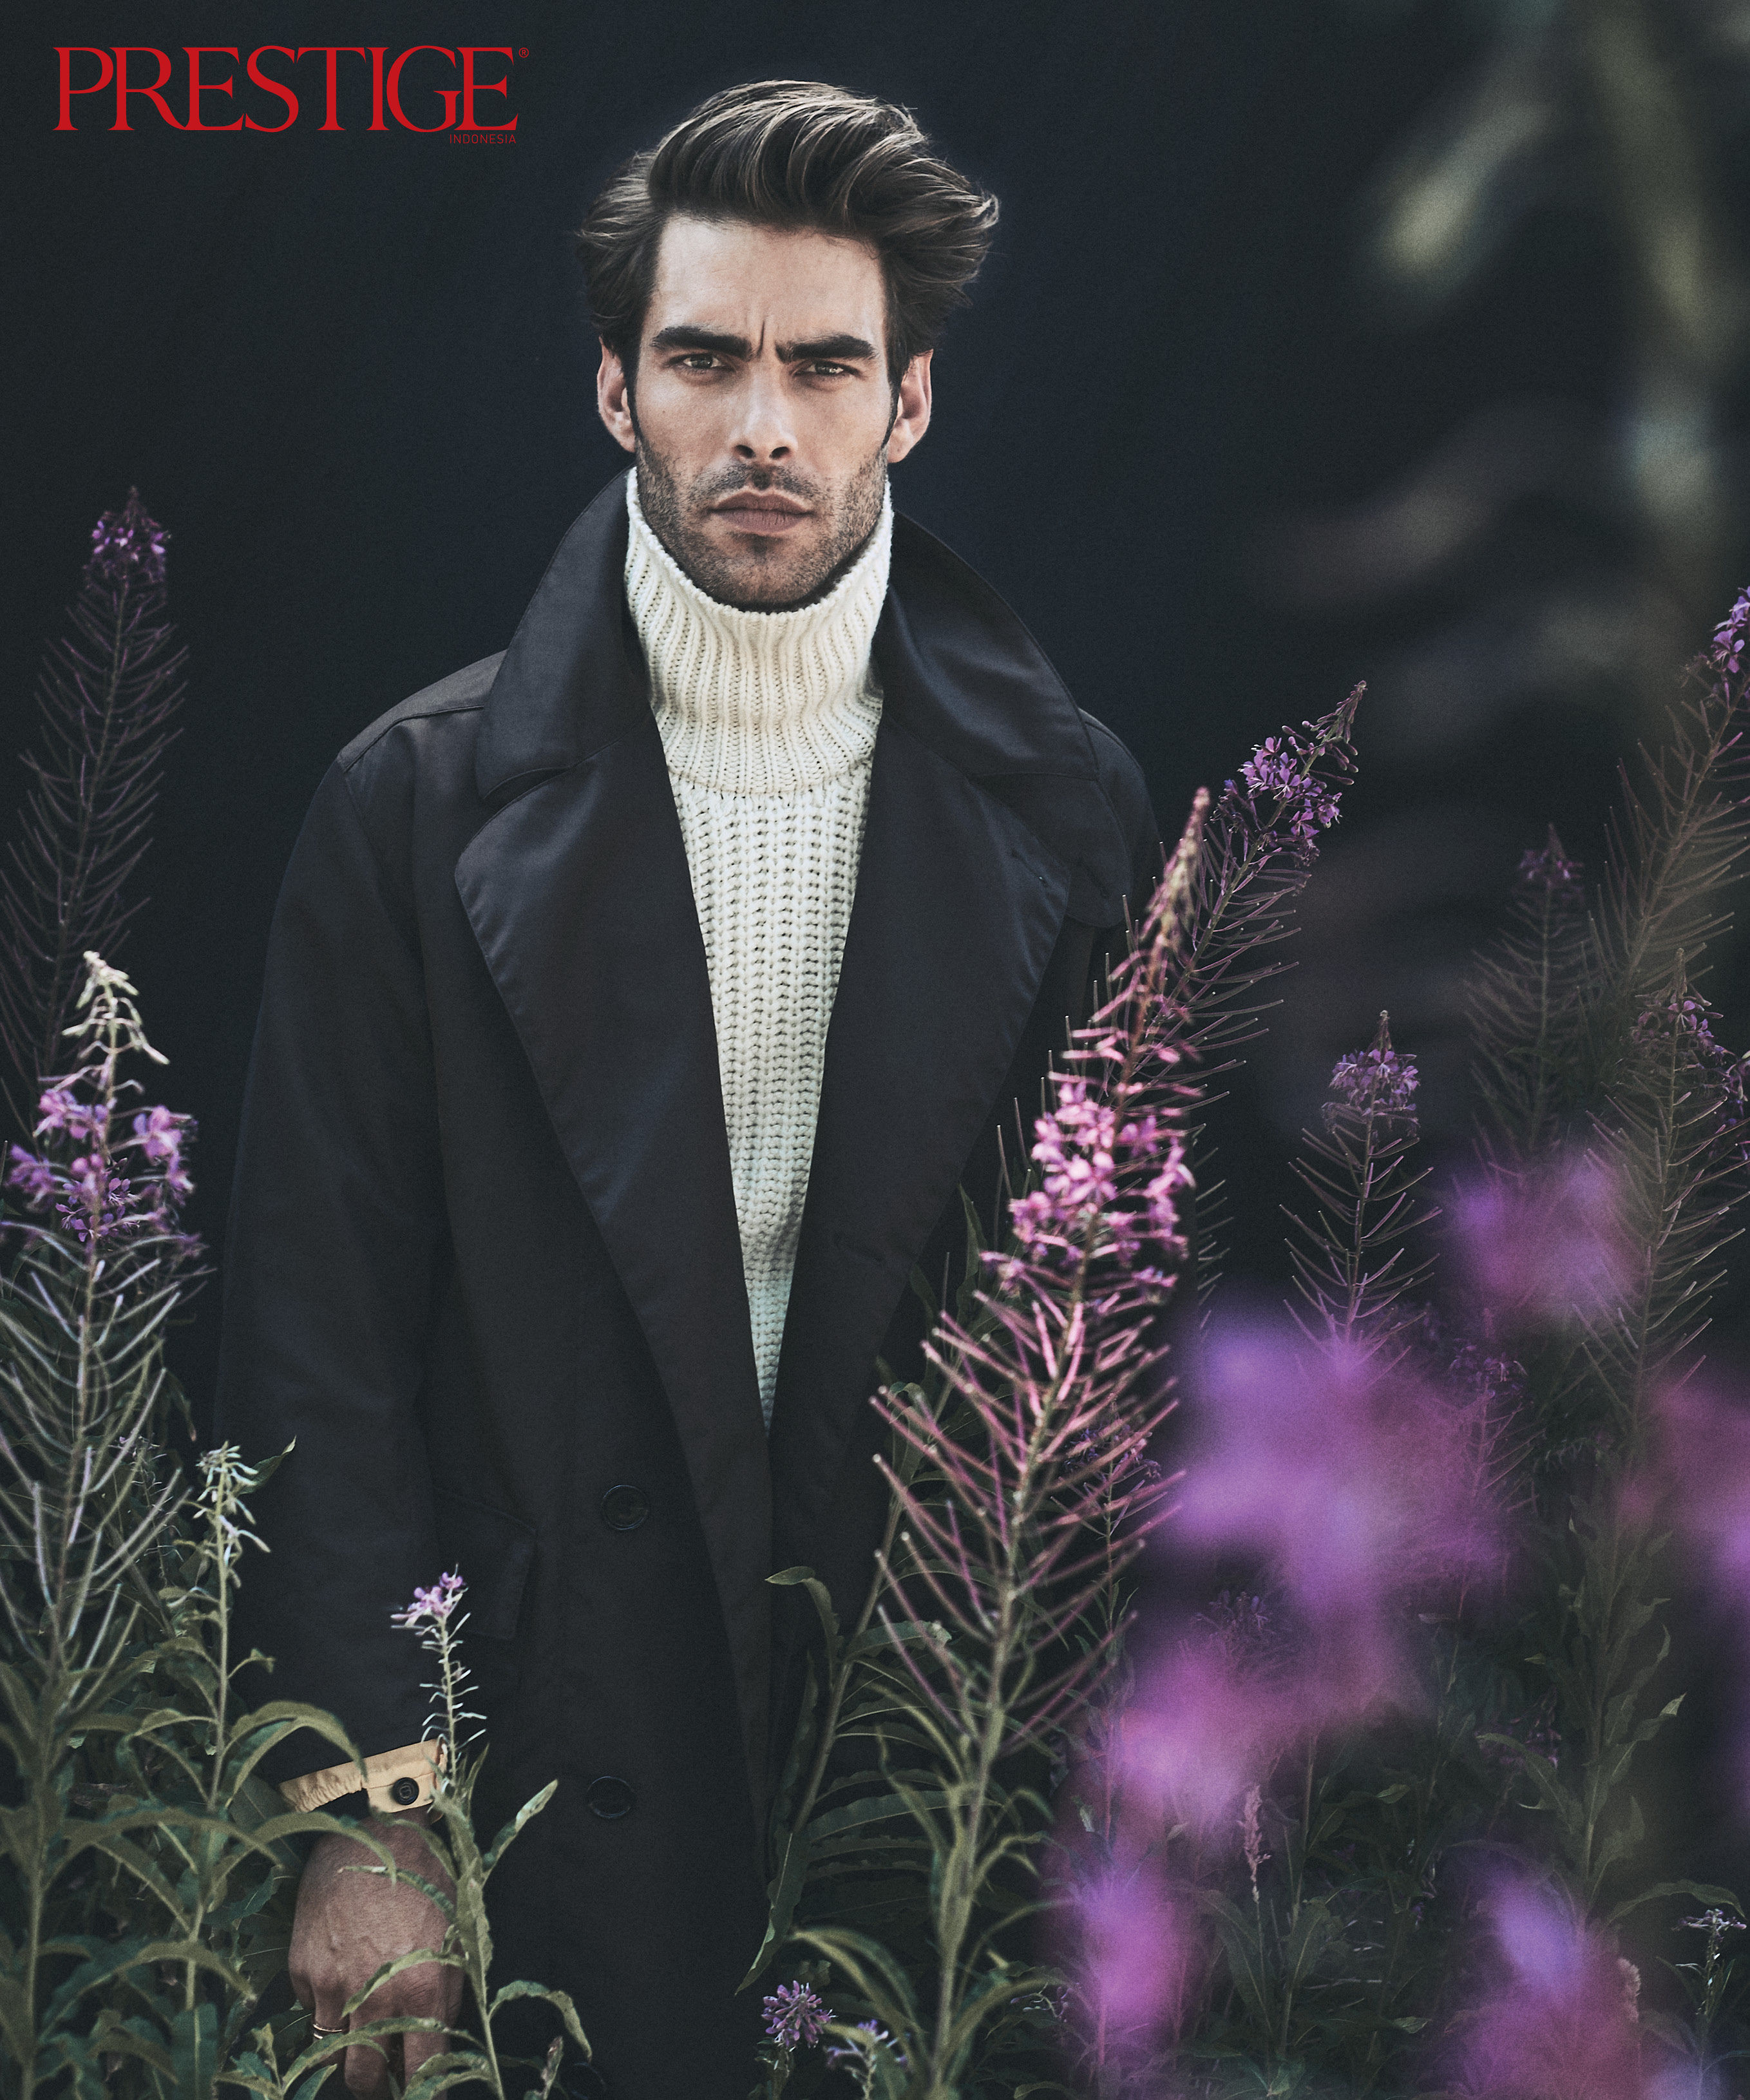 Jon Kortajarena: A Top Model with a Dream to Be A Top Actor